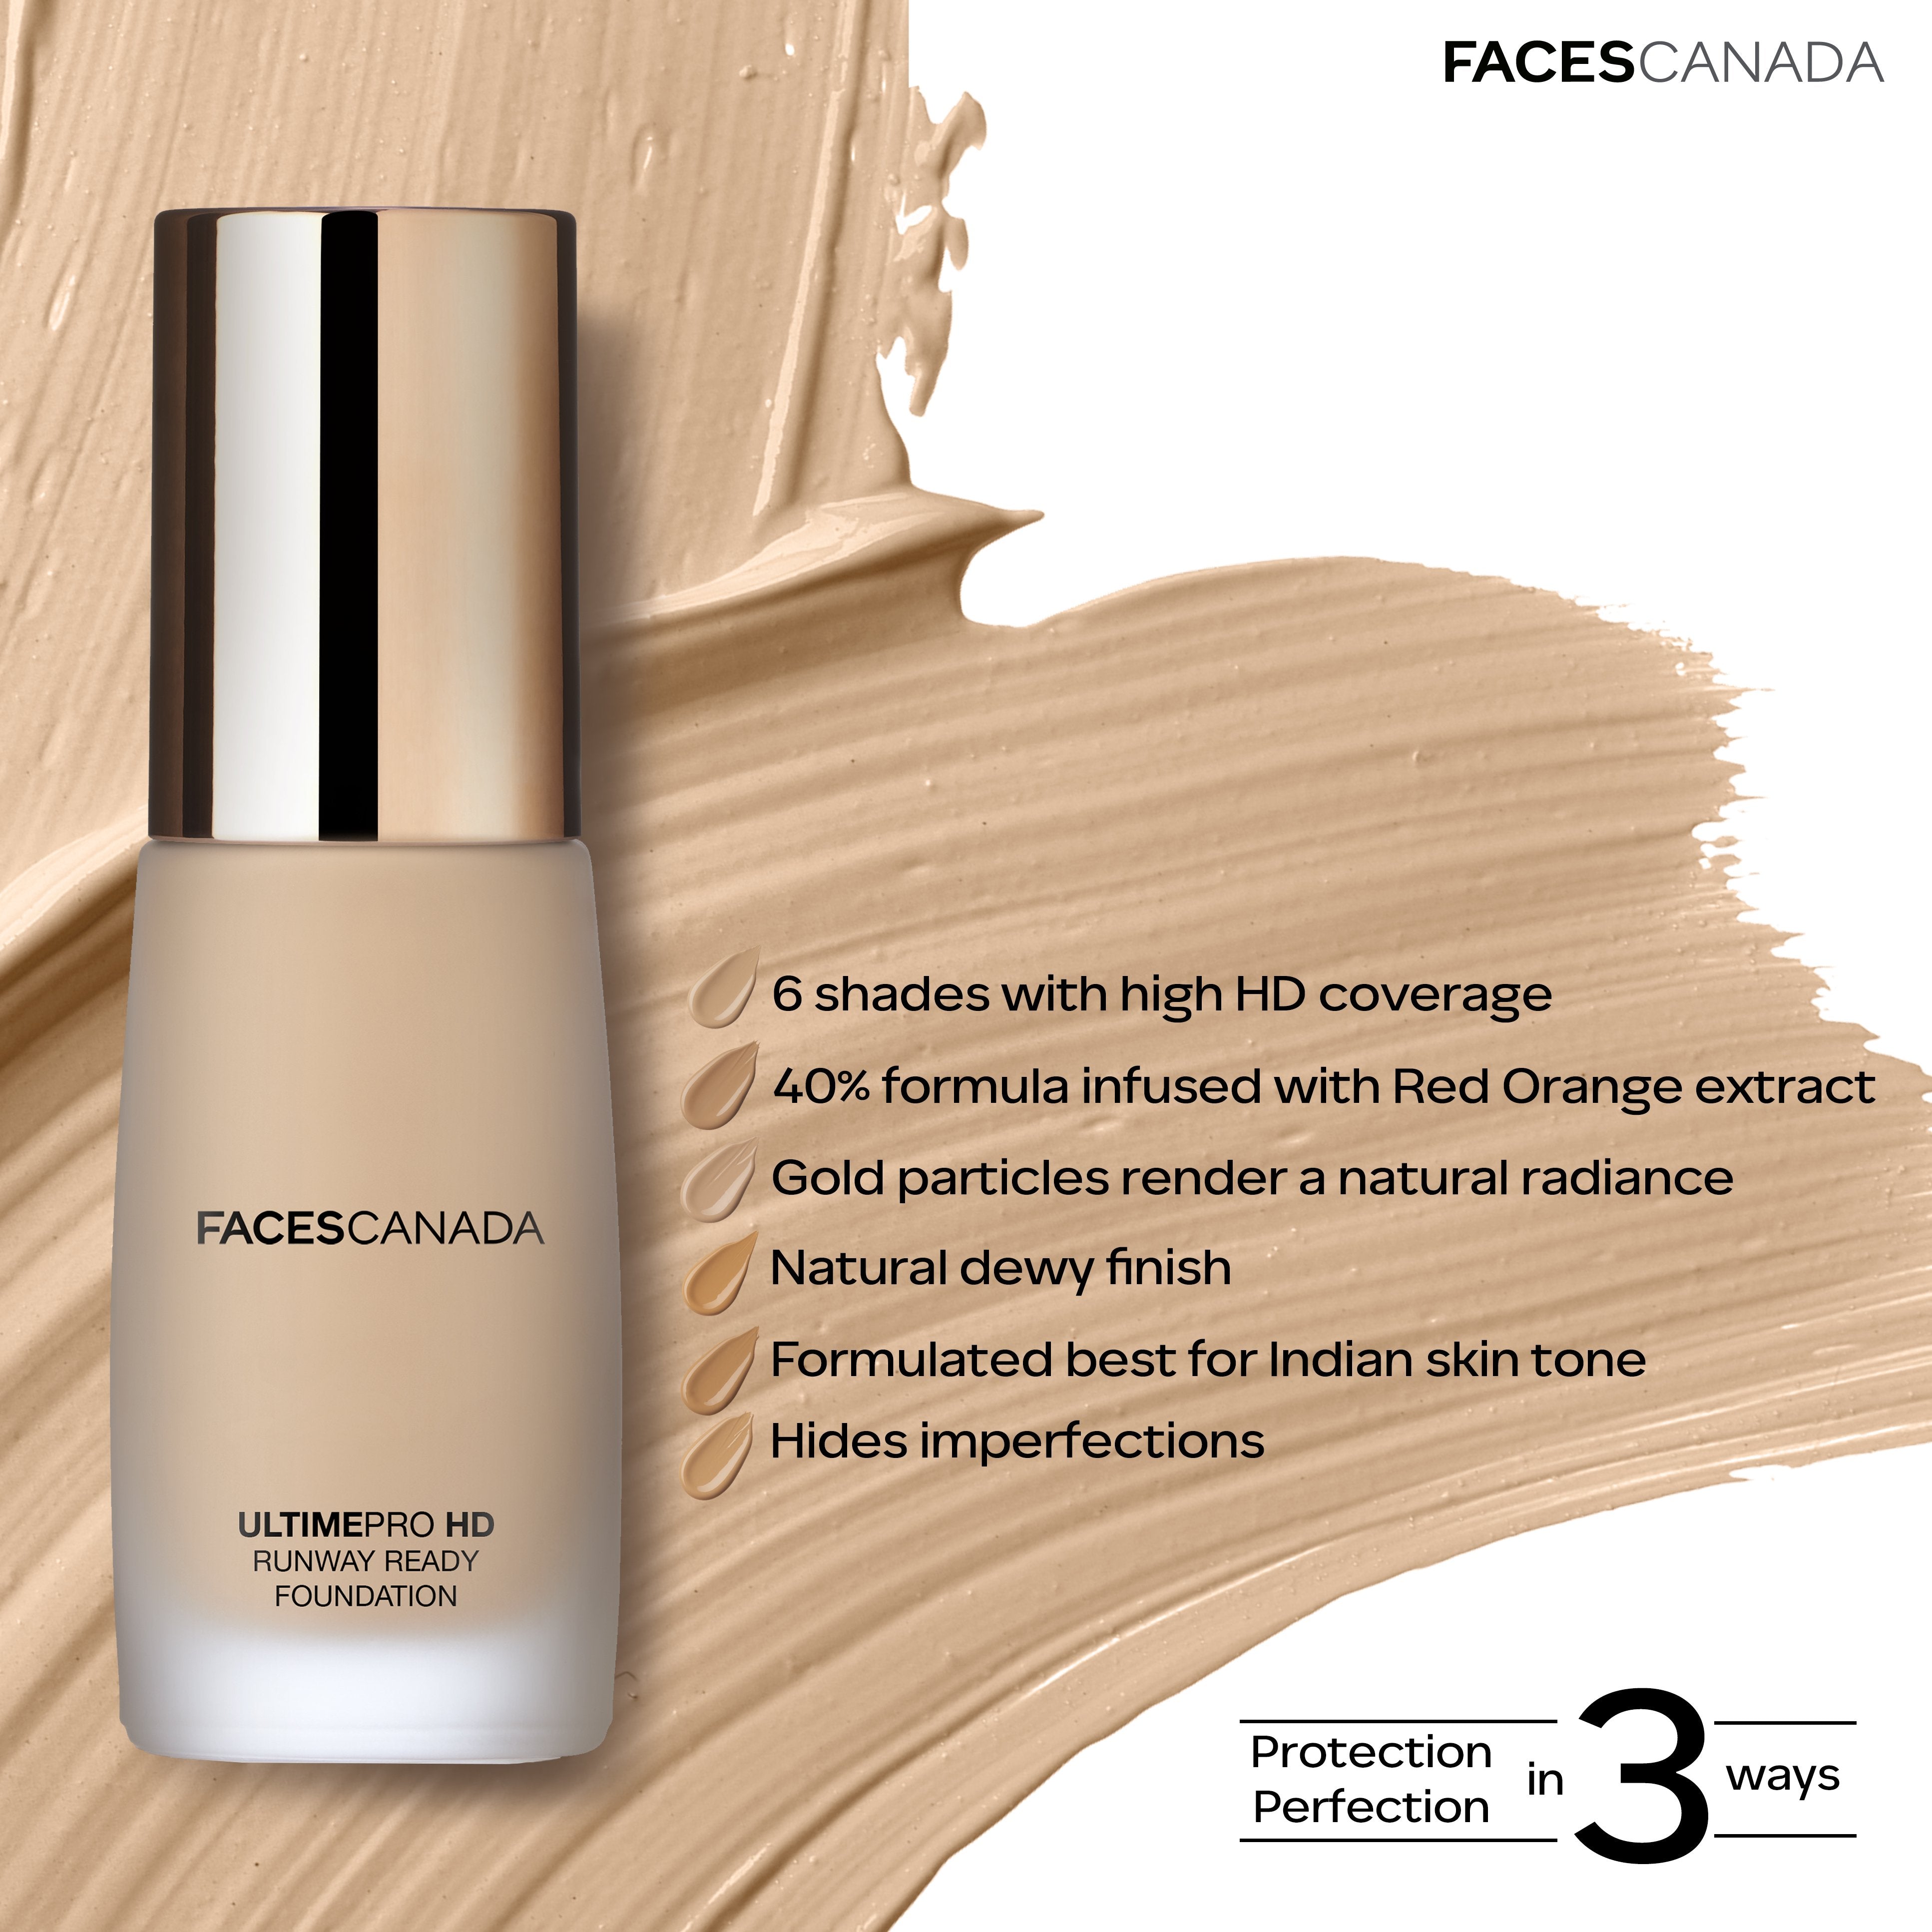 Faces Canada Ultime Pro HD Runway Ready Foundation (30ml) Faces Canada